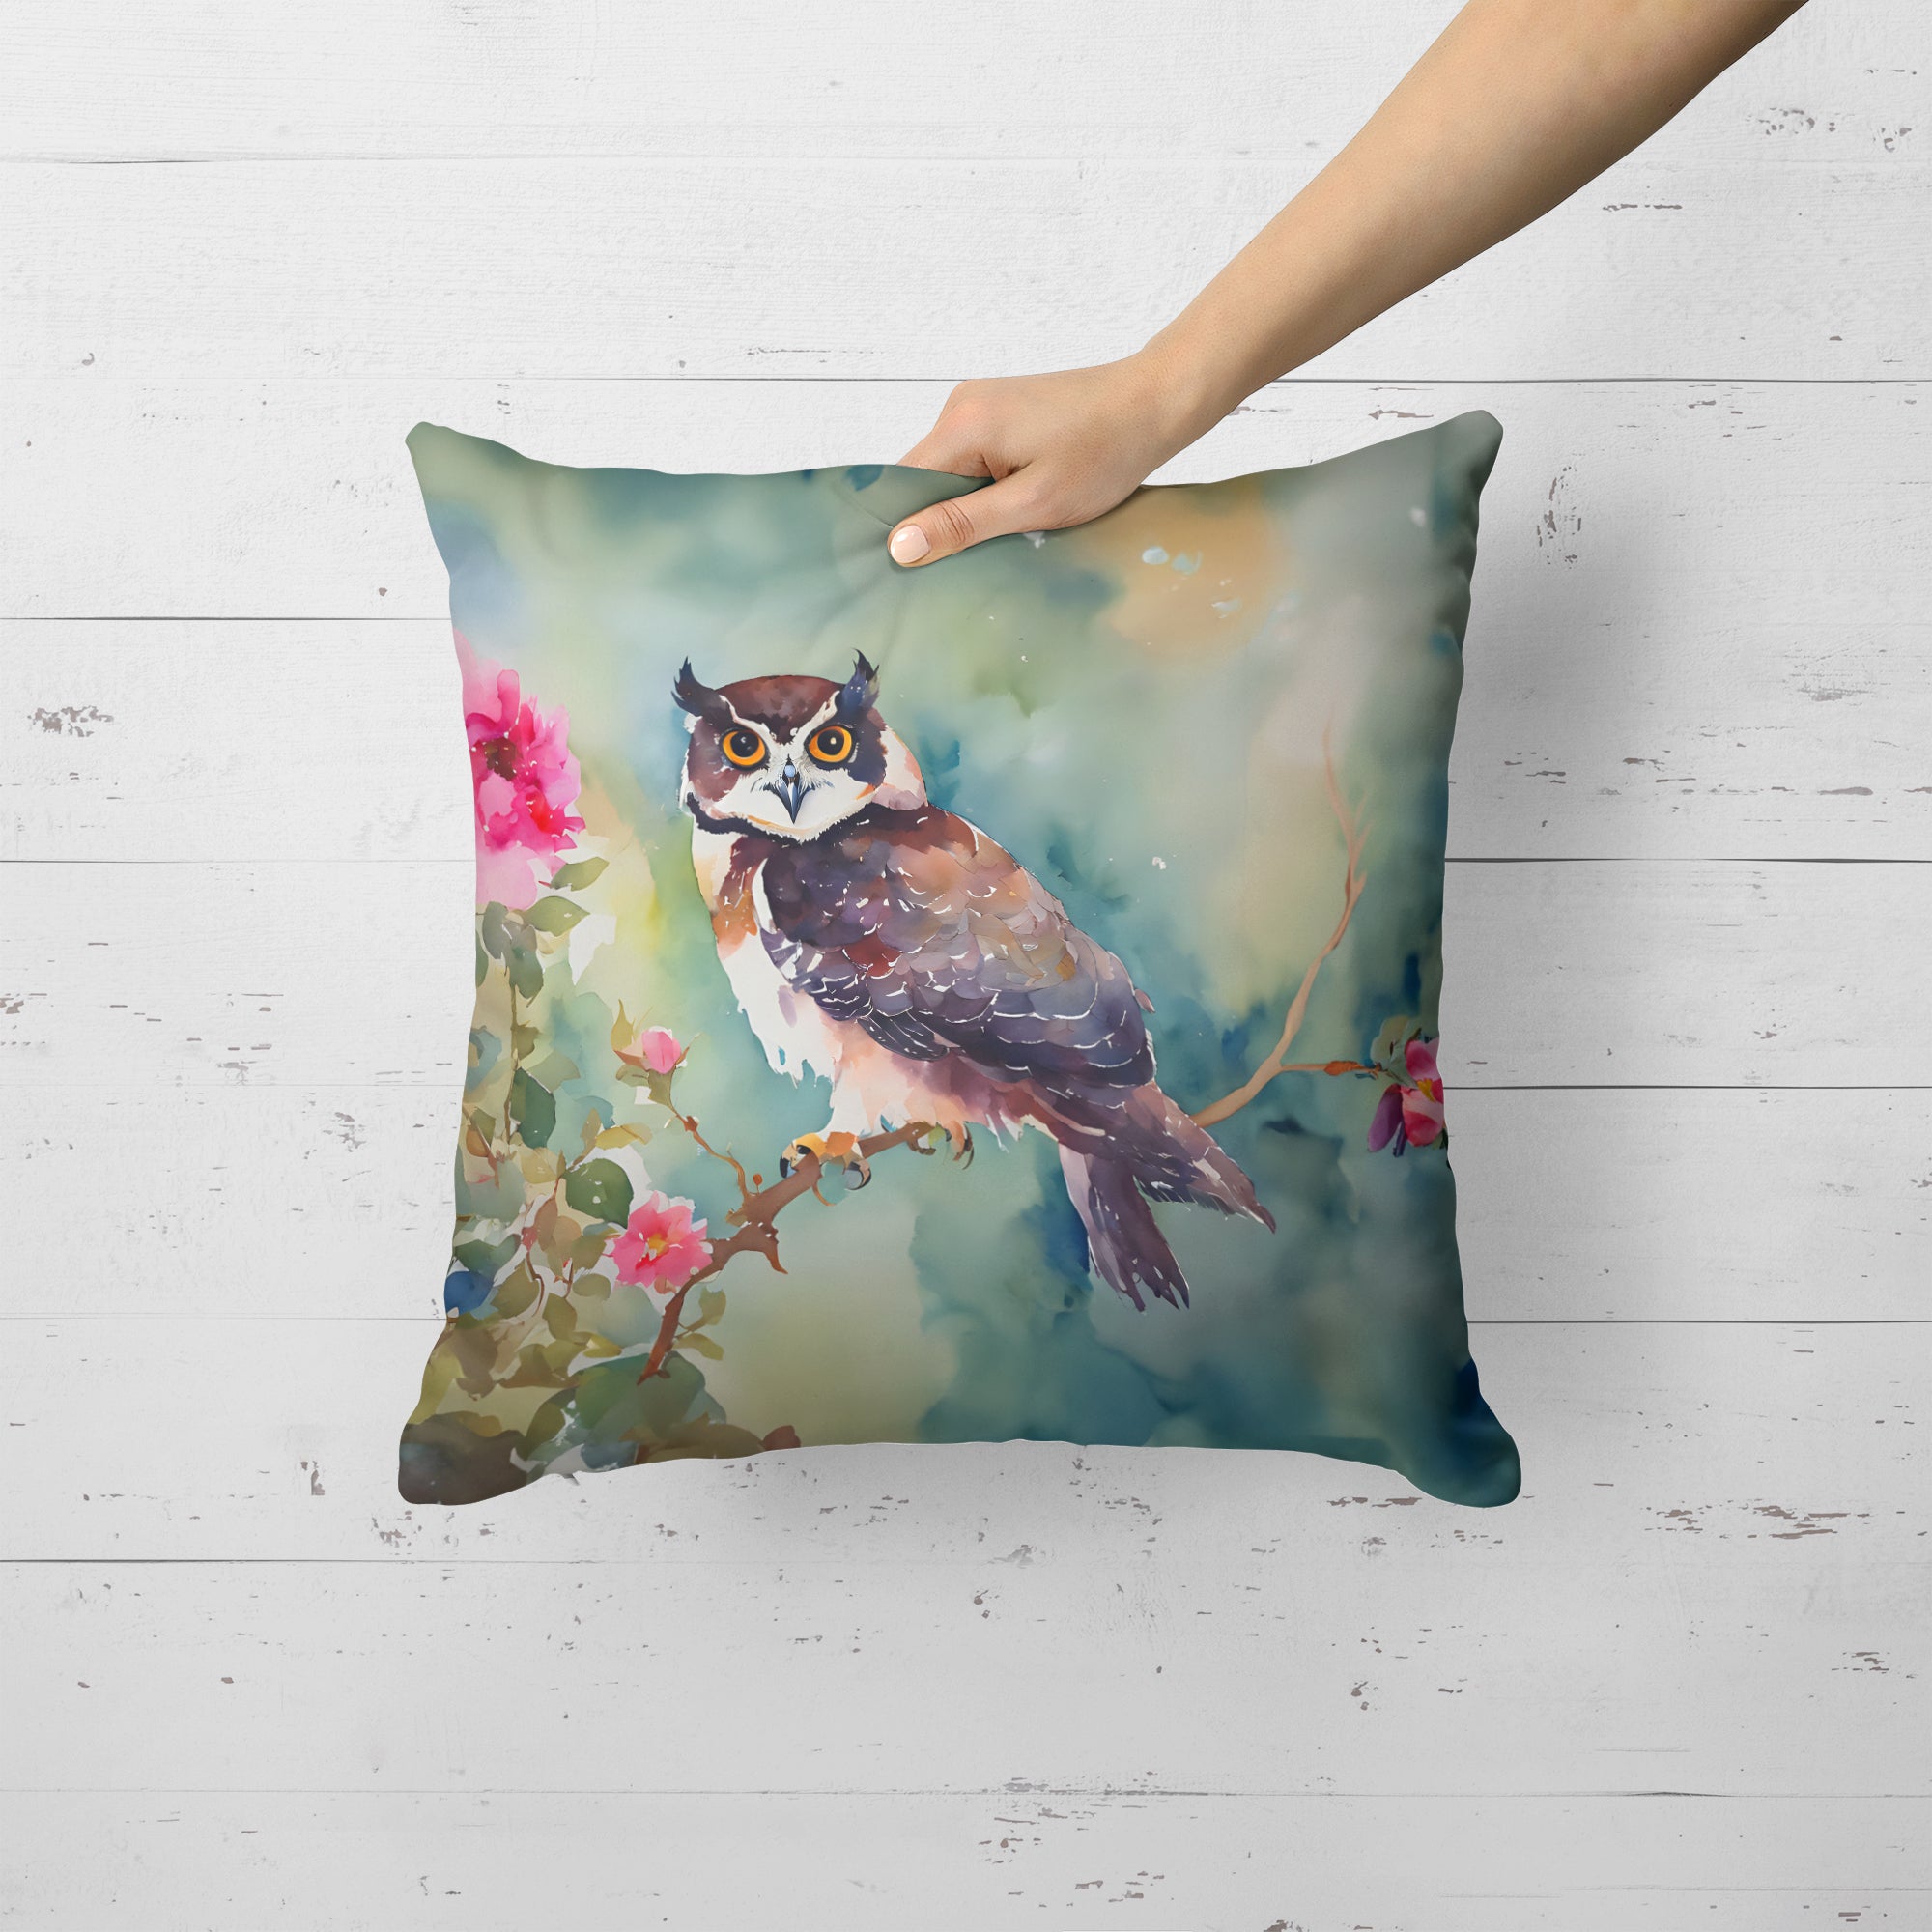 Buy this Spectacled Owl Throw Pillow